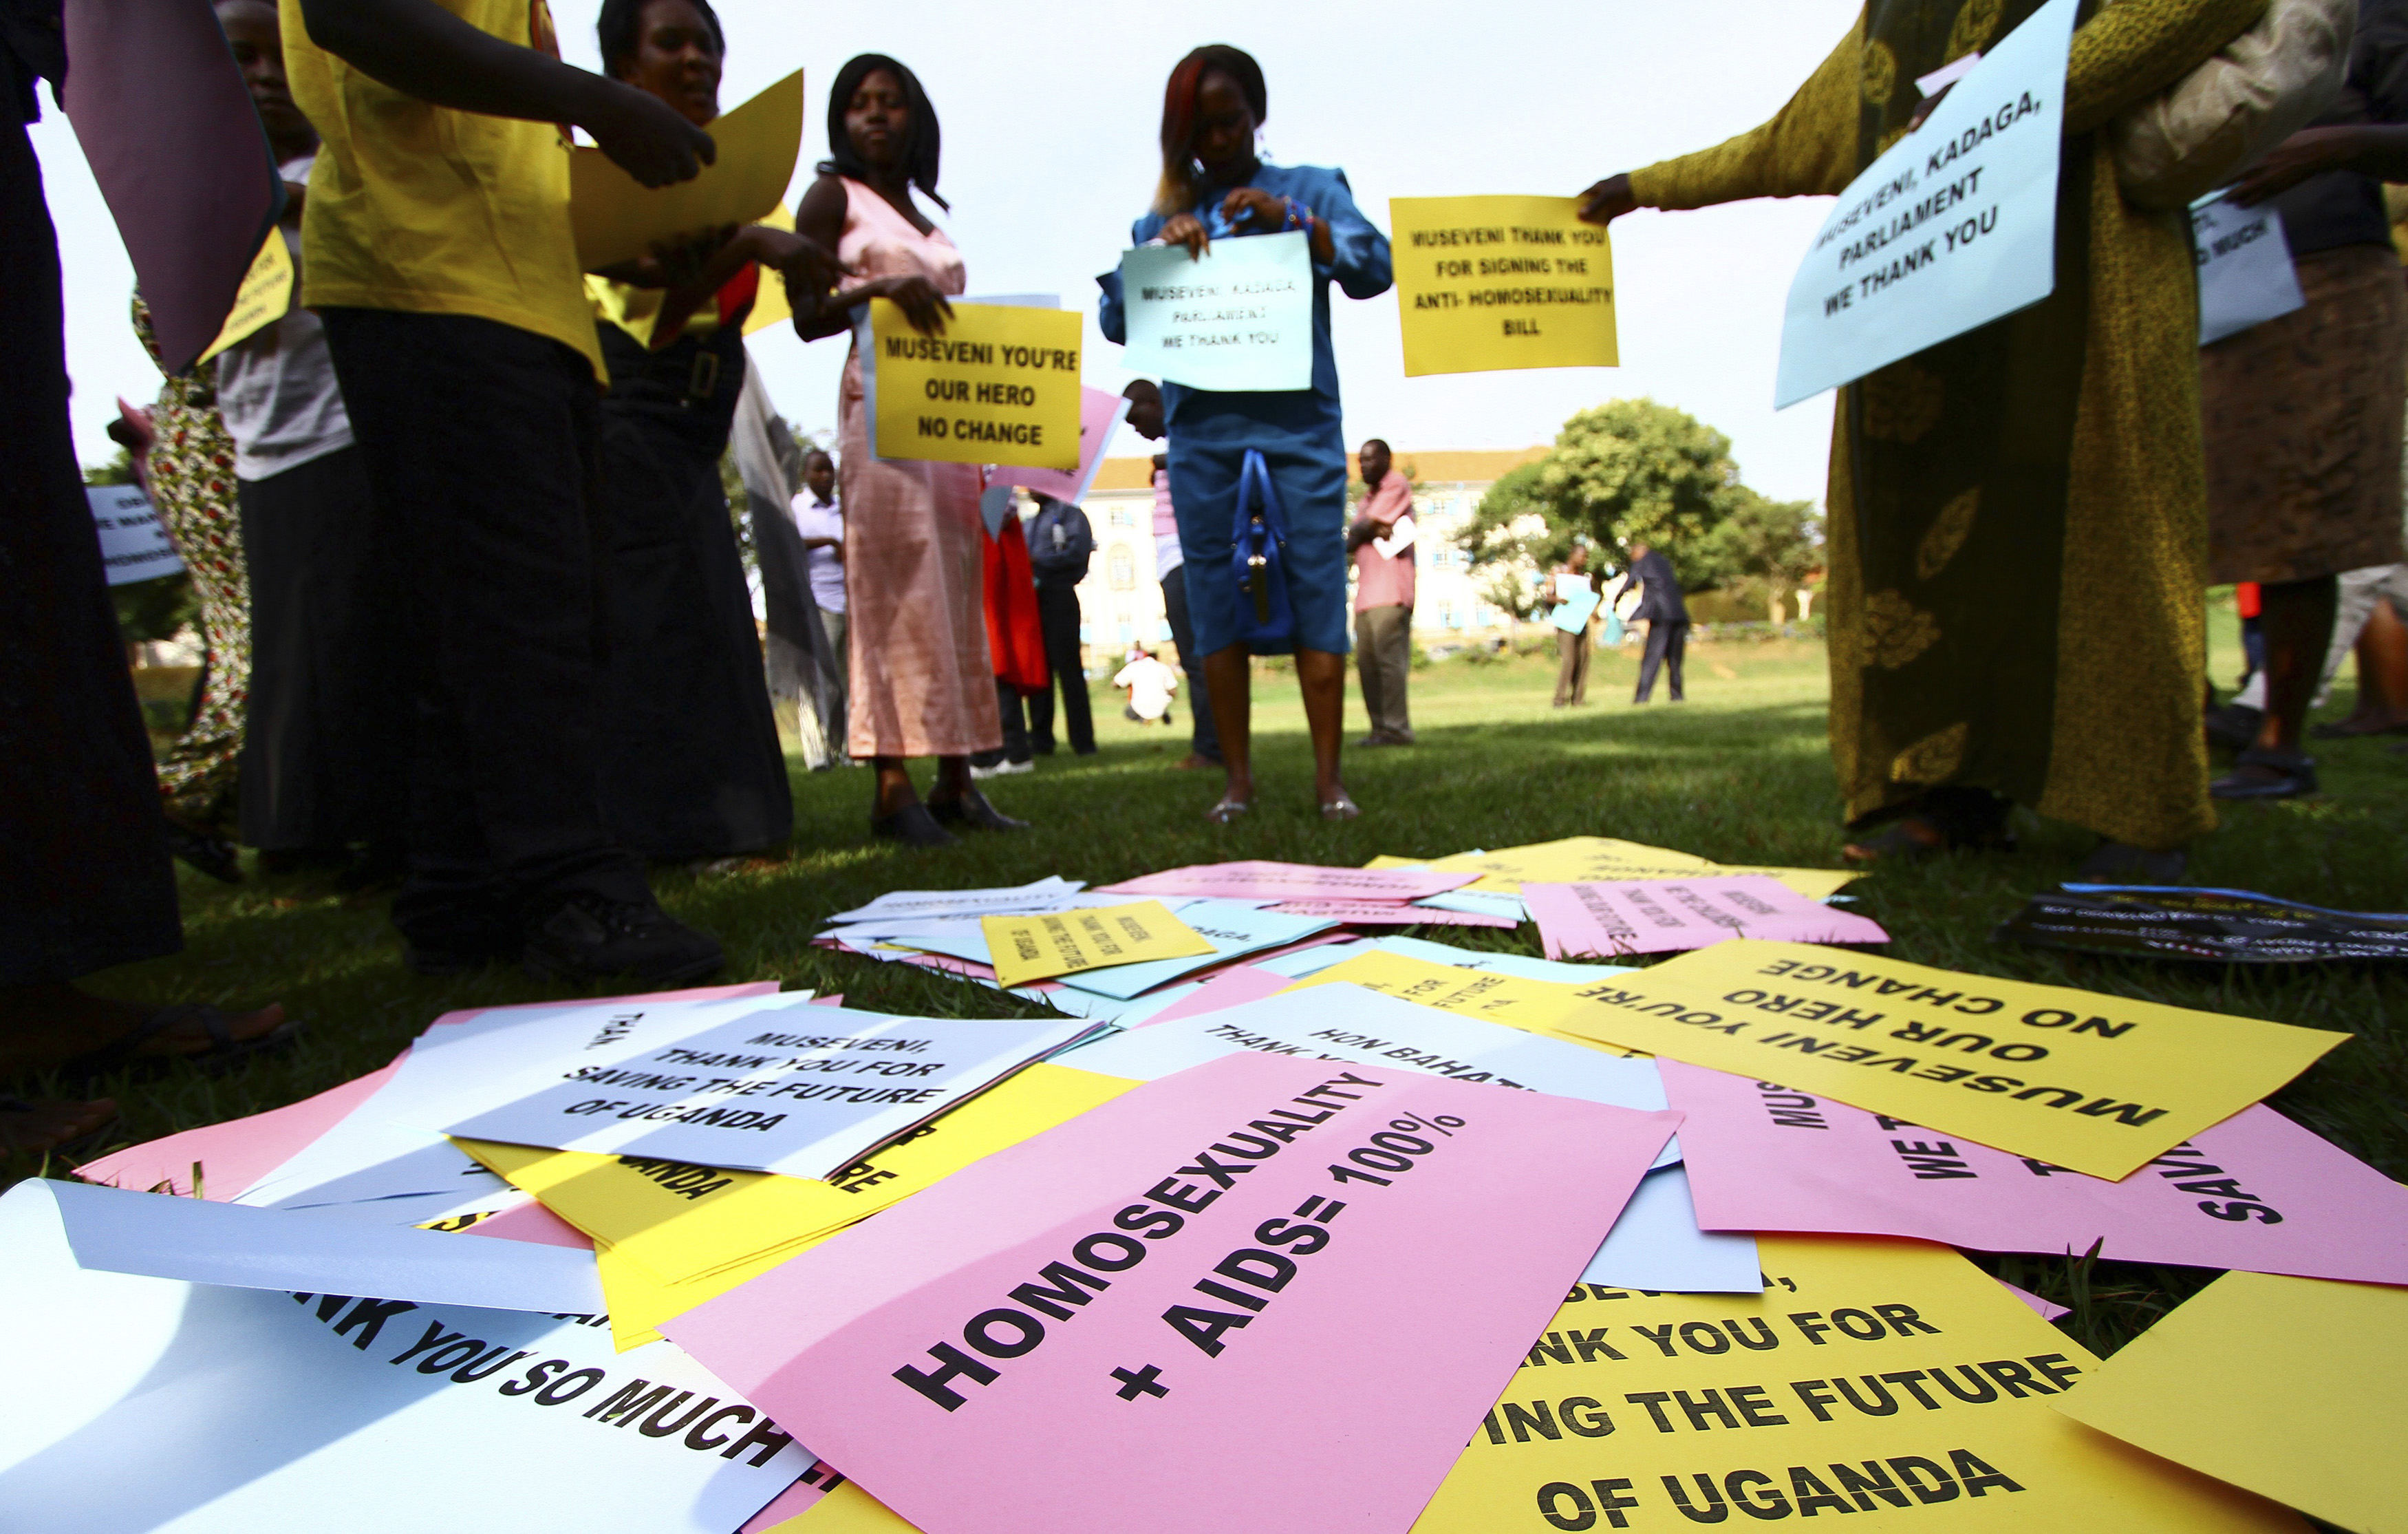 Supporters of the anti-gay law prepare for a procession backing the signing of the anti-gay bill into law, in Uganda's capital Kampala March 31, 2014. (Edward Echwalu —Reuters)